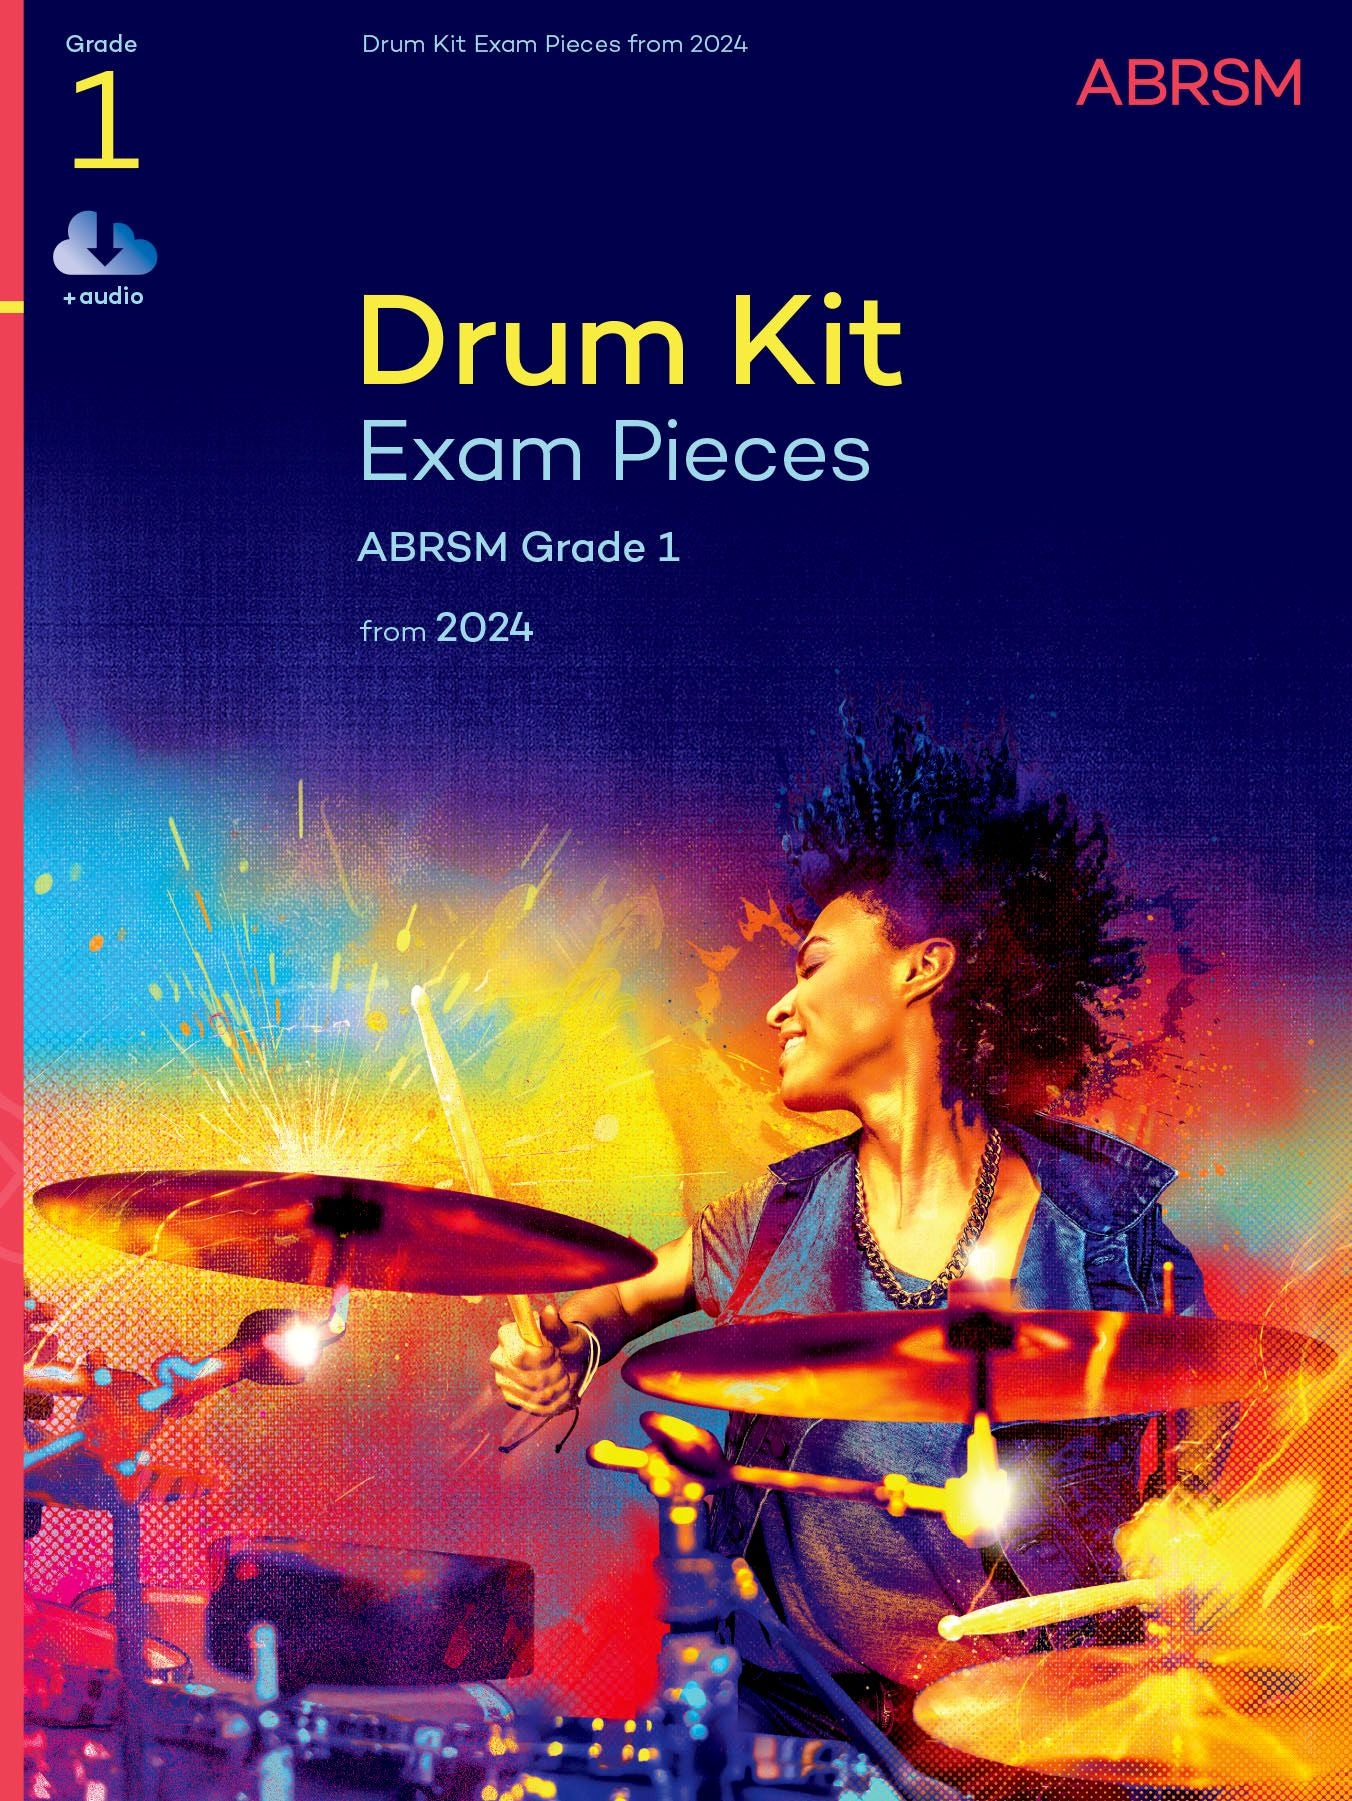 ABRSM Drum Kit Exam Pieces Grade 1 from 2024 (w/ Audio)